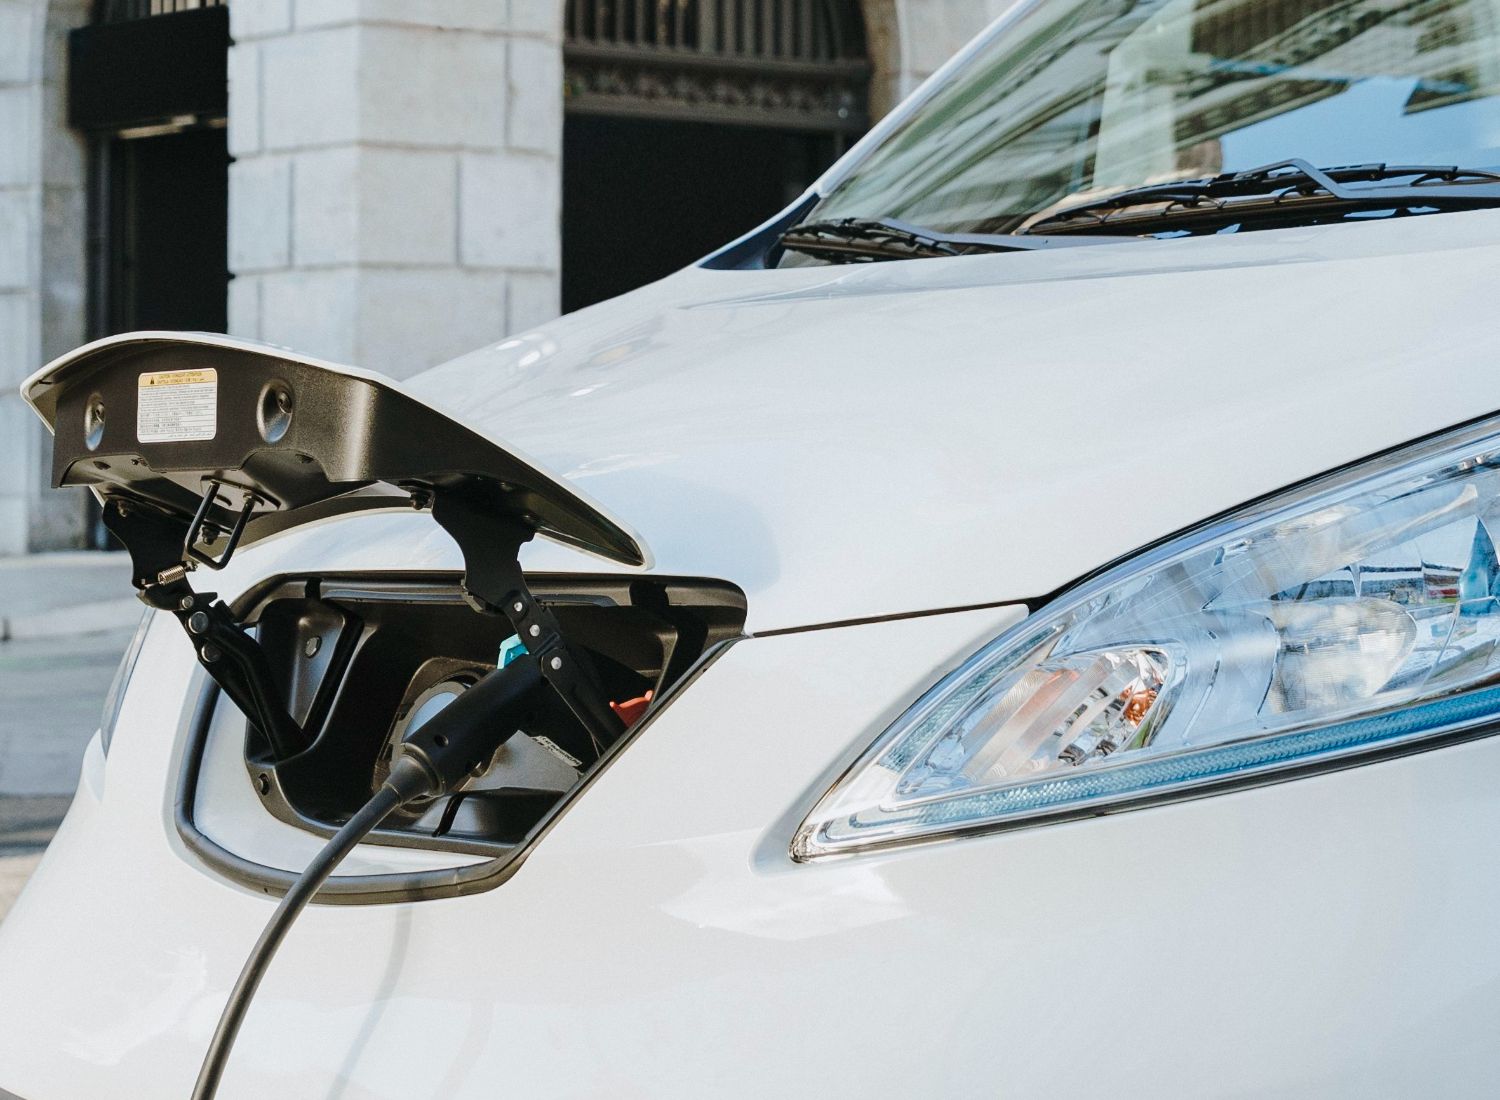 Connected EVs save businesses 15 tonnes of CO2 per vehicle annually, Webfleet research finds